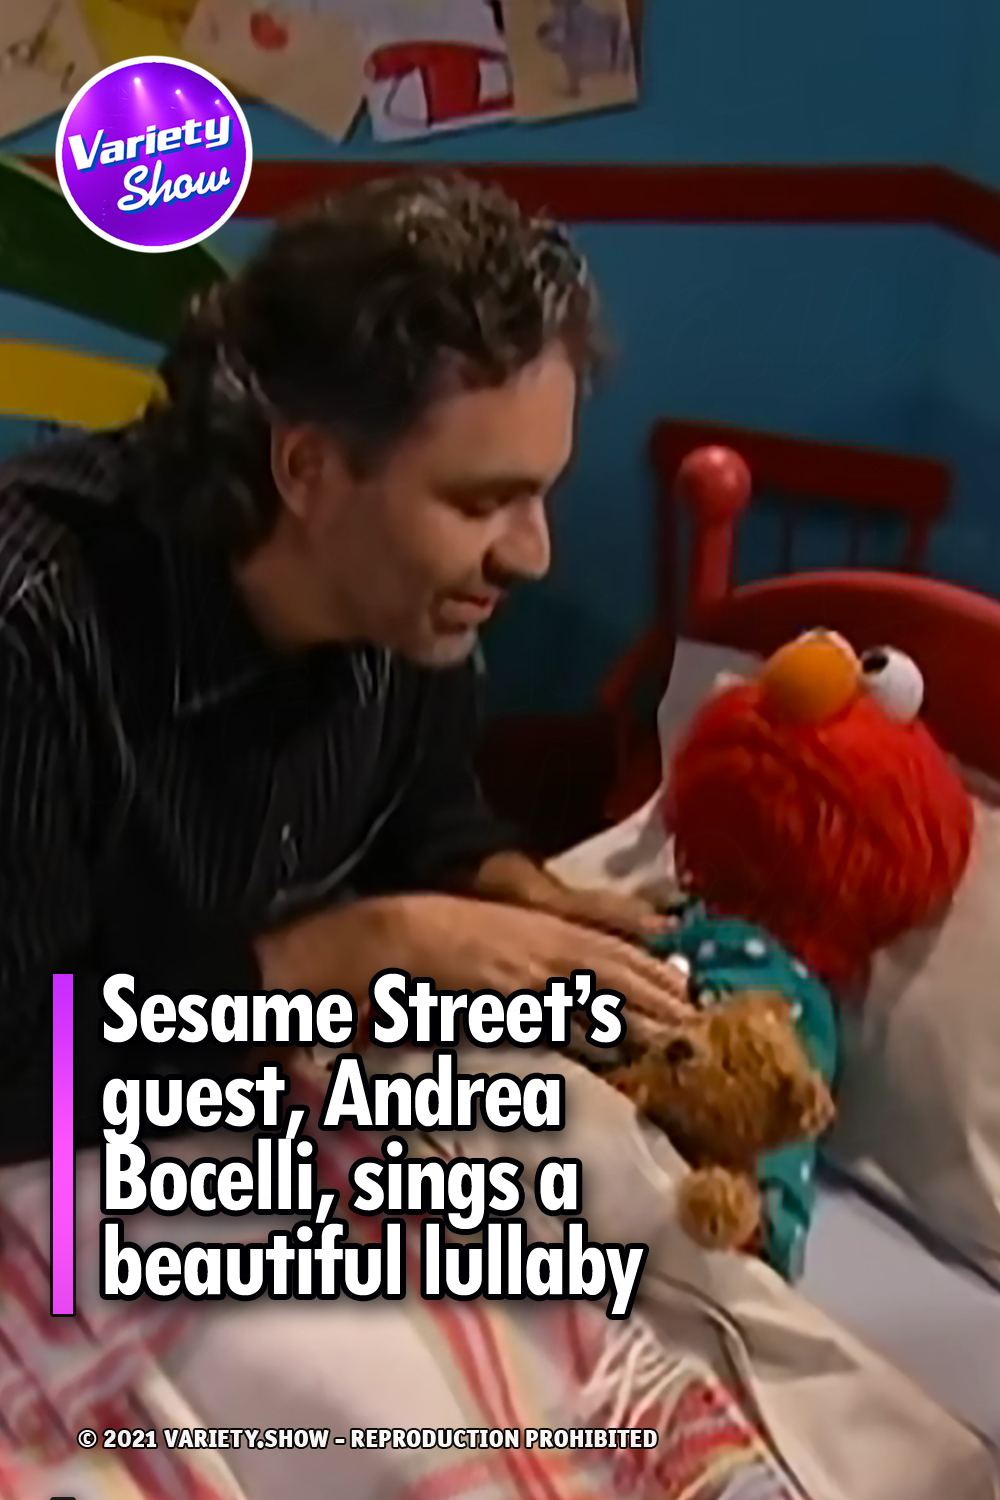 Sesame Street’s guest, Andrea Bocelli, sings a beautiful lullaby